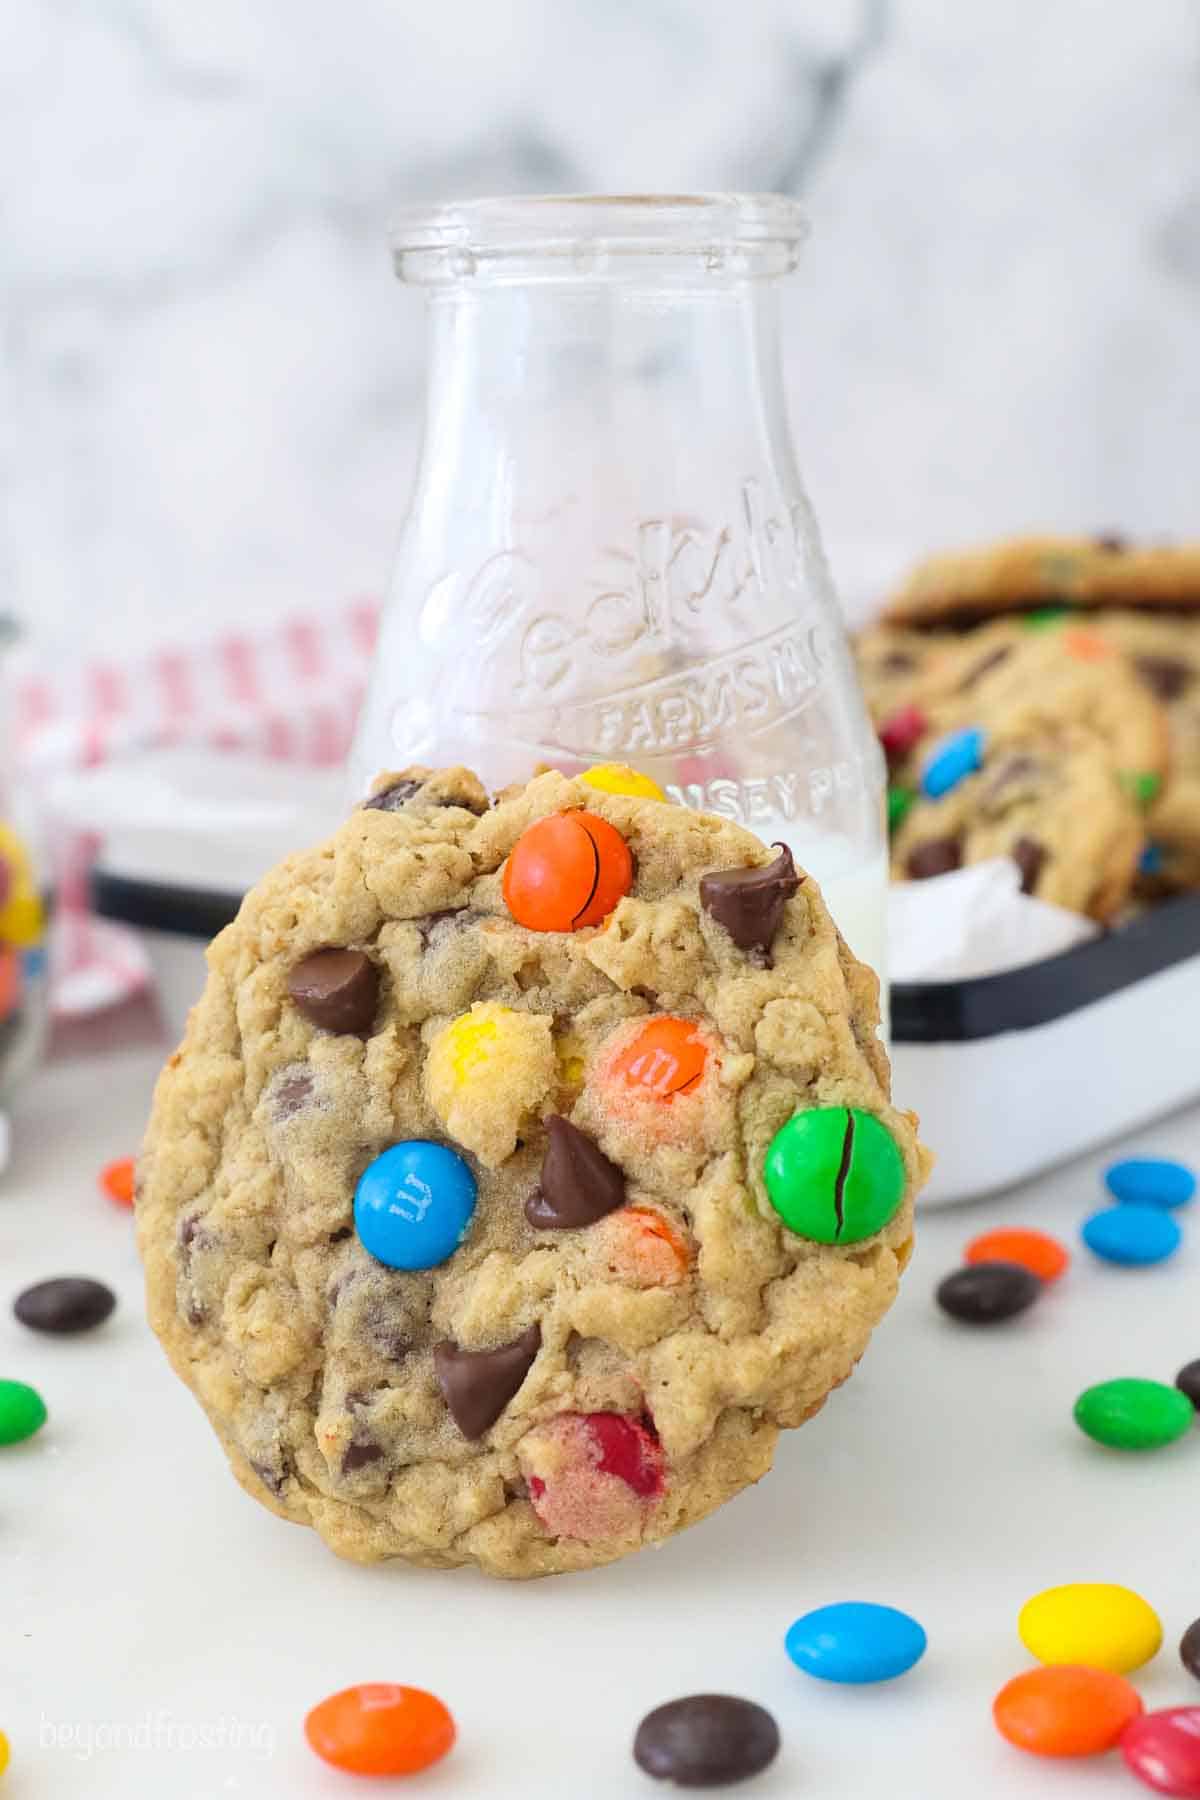 A Monster Cookie resting against a glass of milk.